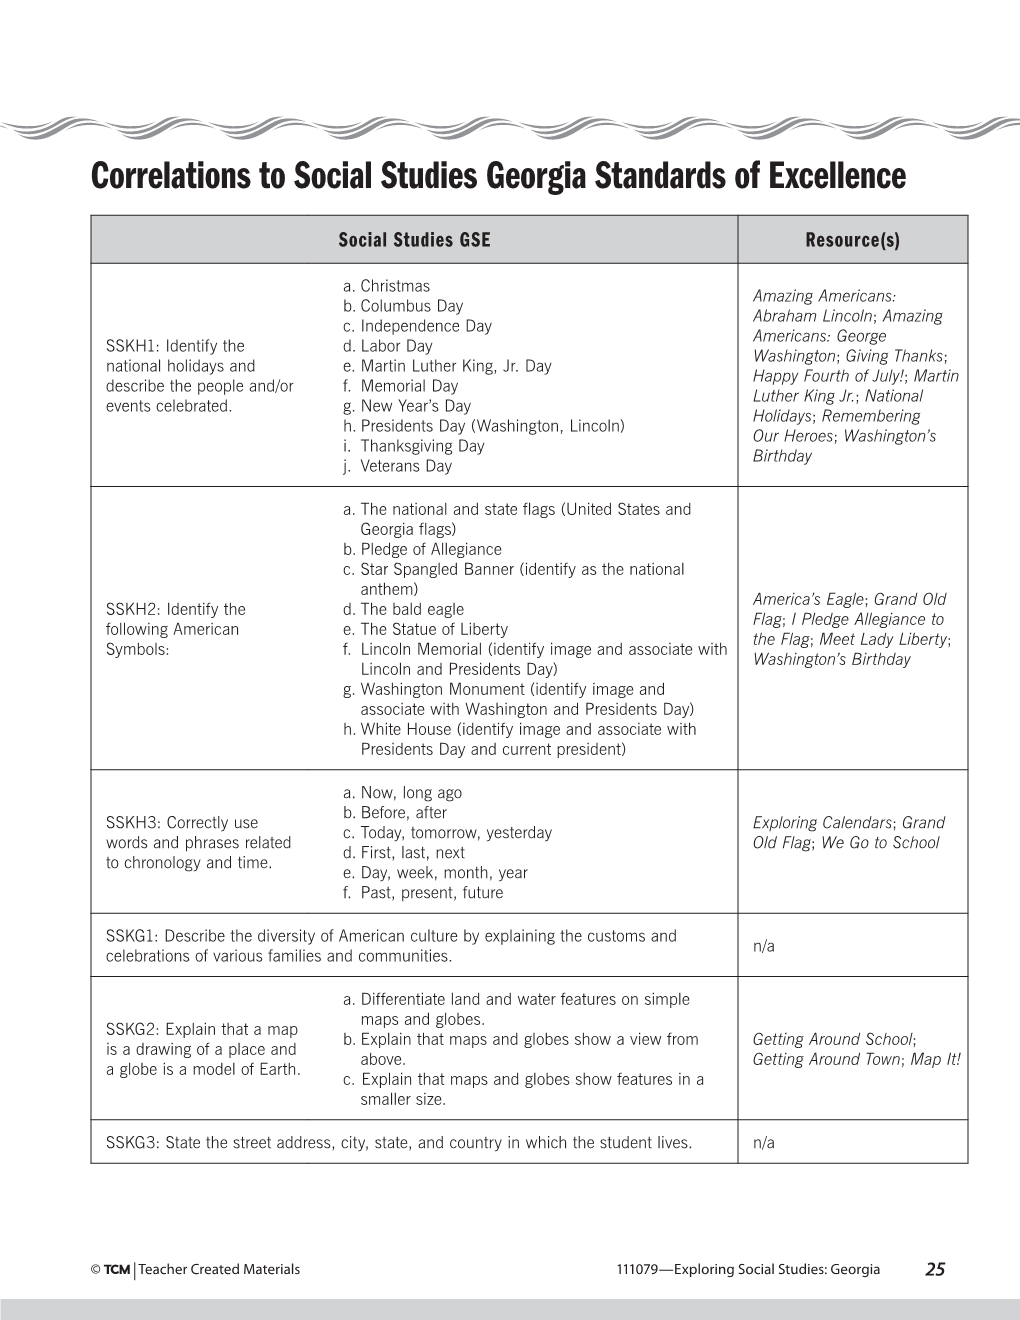 Correlations to Social Studies Georgia Standards of Excellence